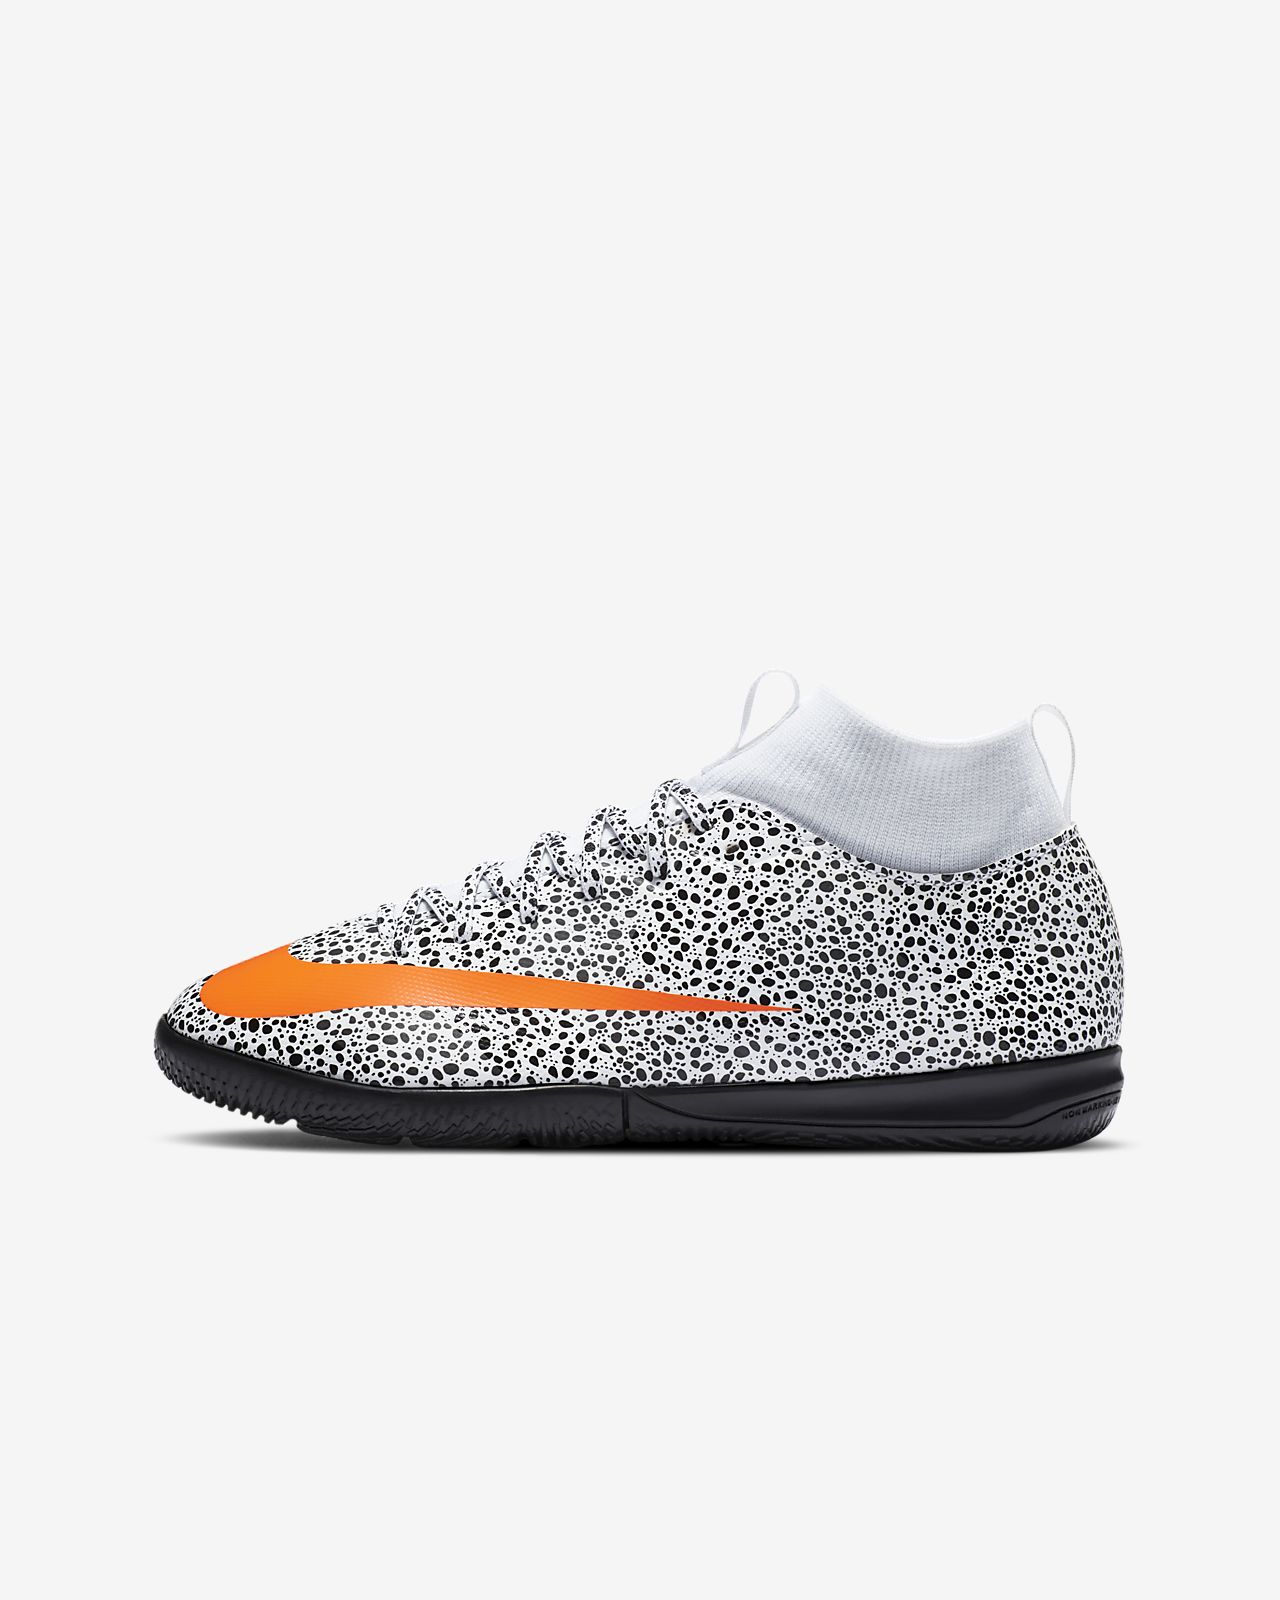 Nike Unveil The Mercurial Superfly CR7 Safari SoccerBible